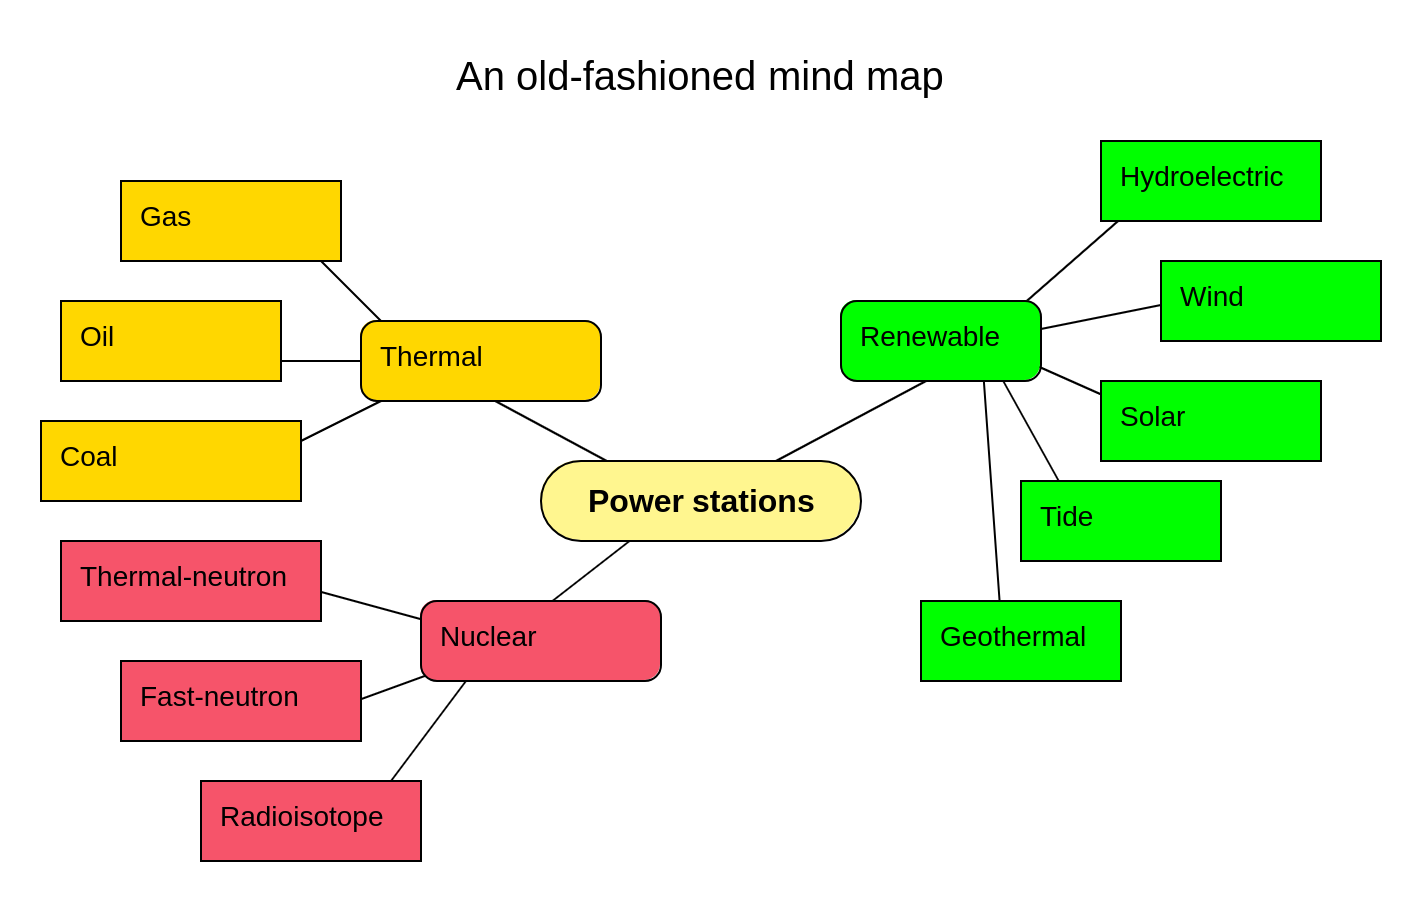 A traditional mind map